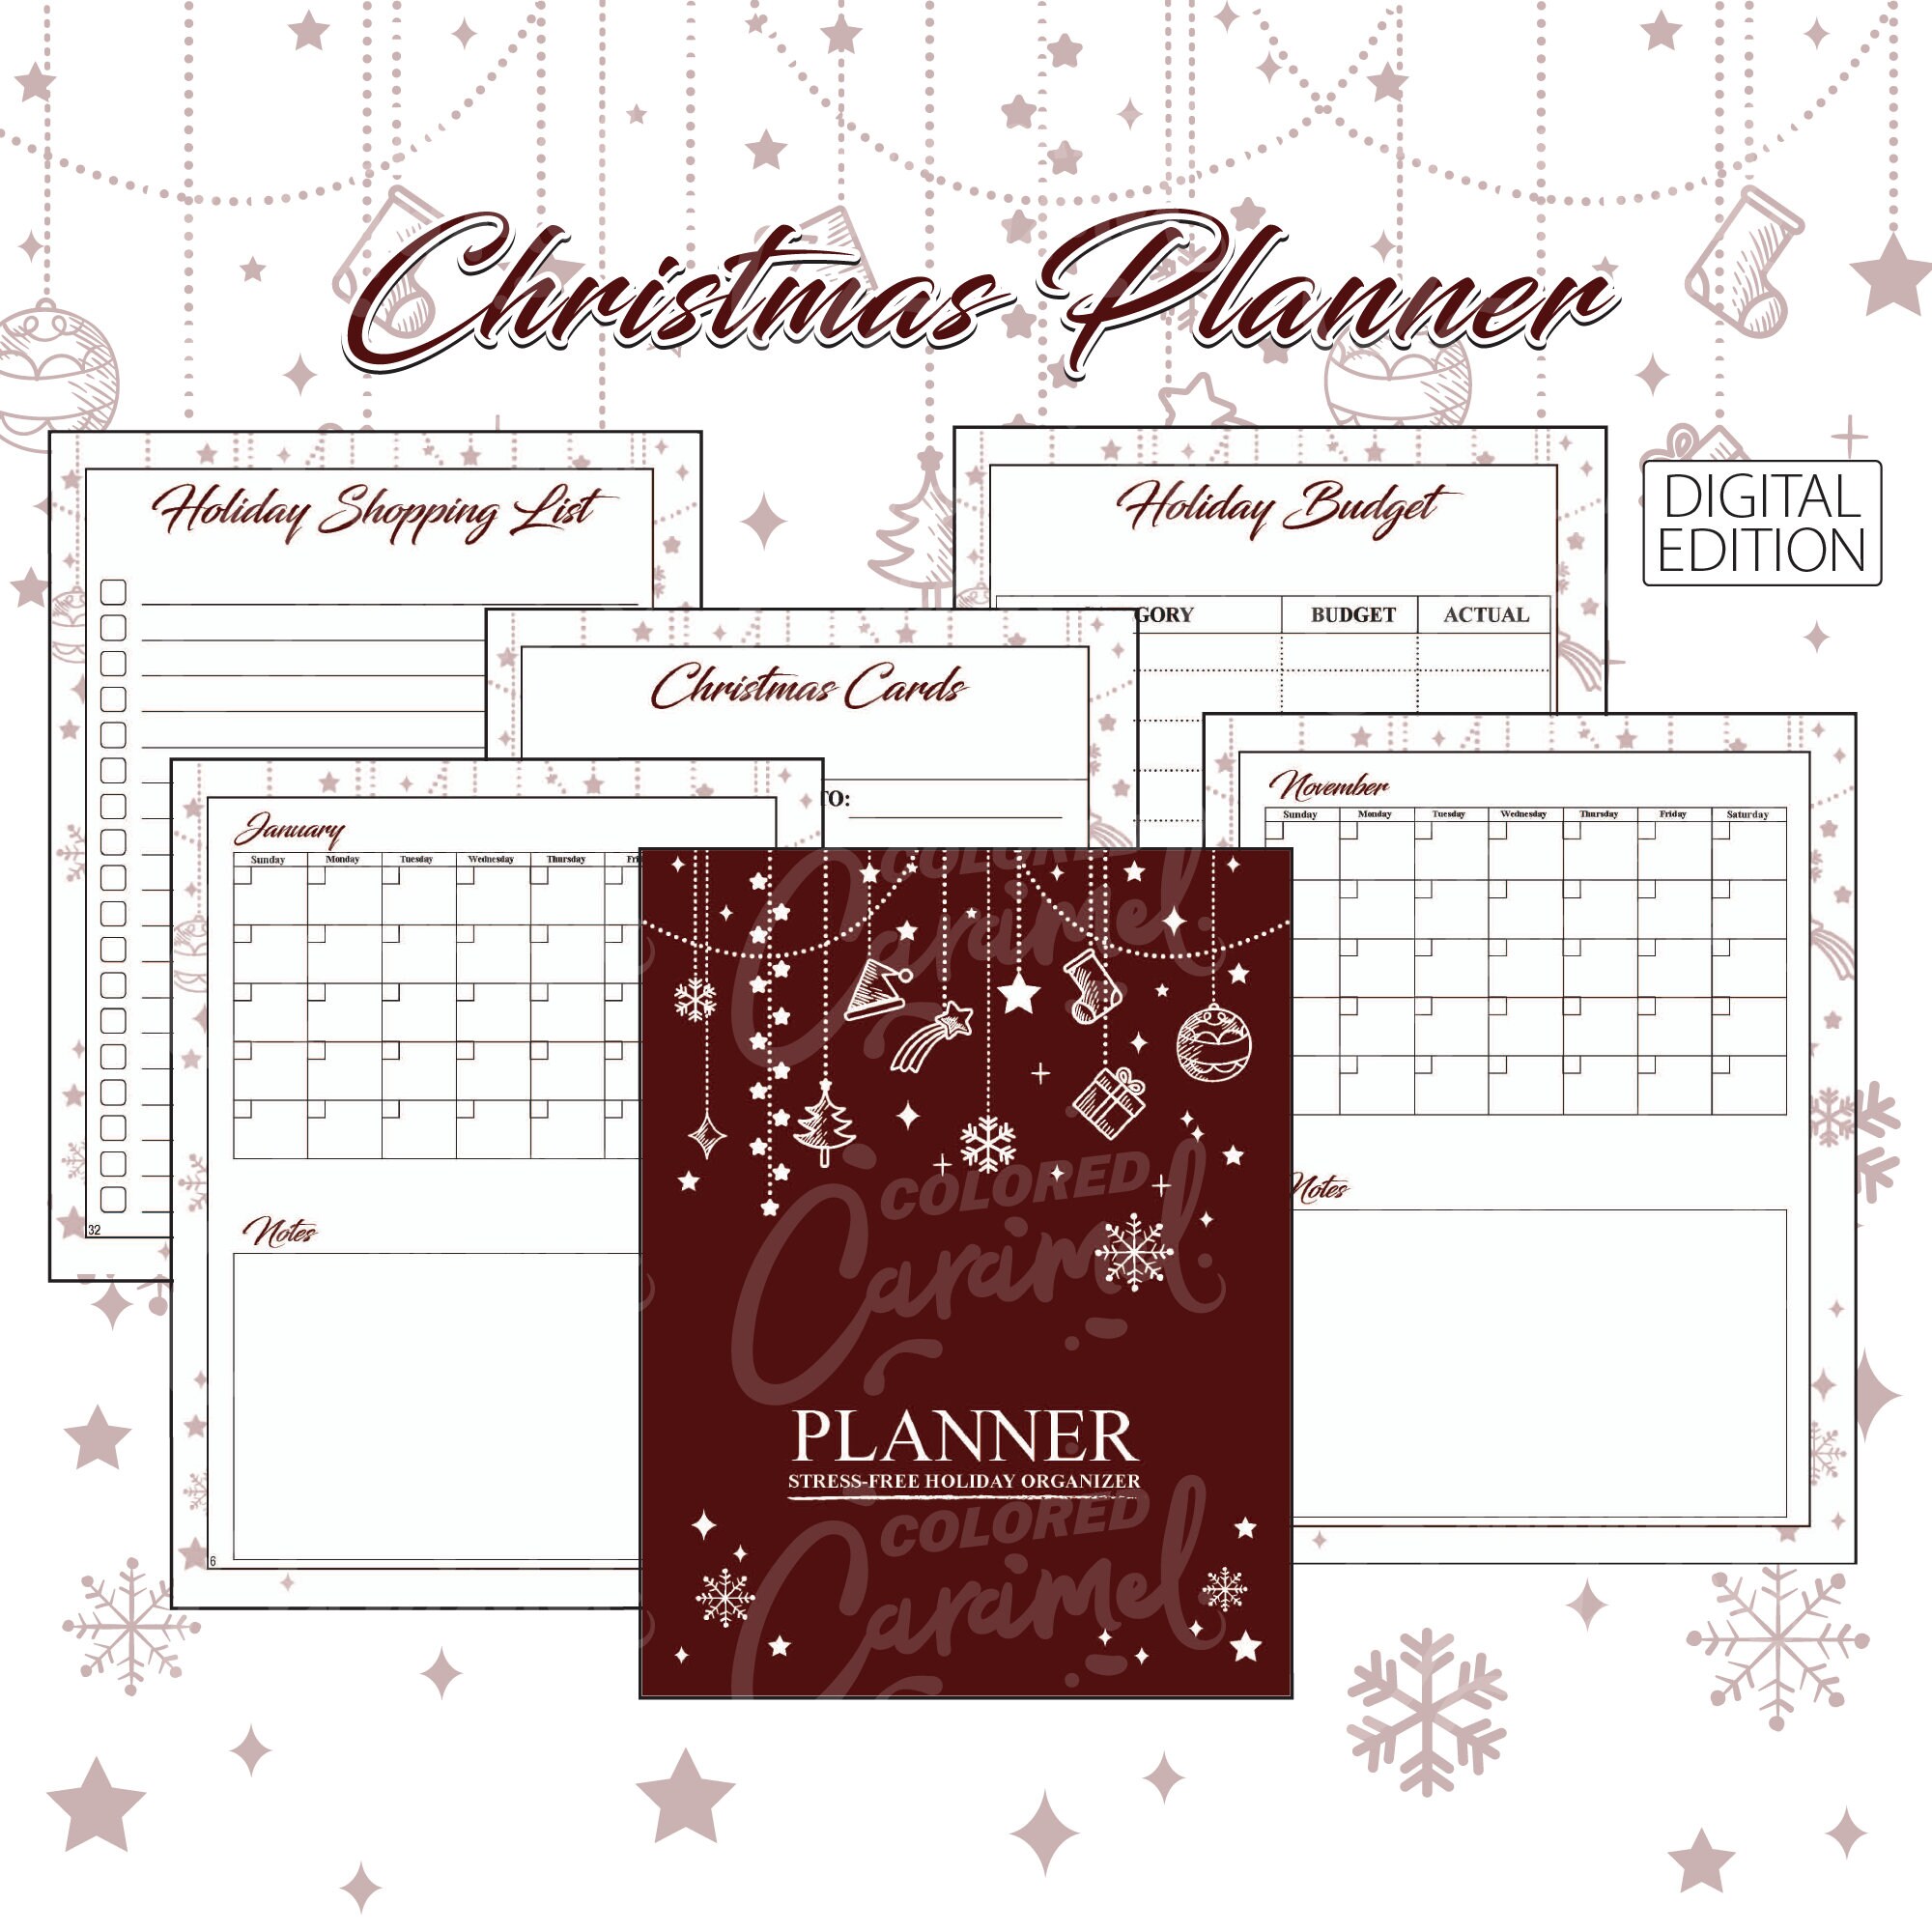 Christmas Planner, Printable PDF Advent Organizer and To-do Templates for Stress-Free & Relaxed Holidays